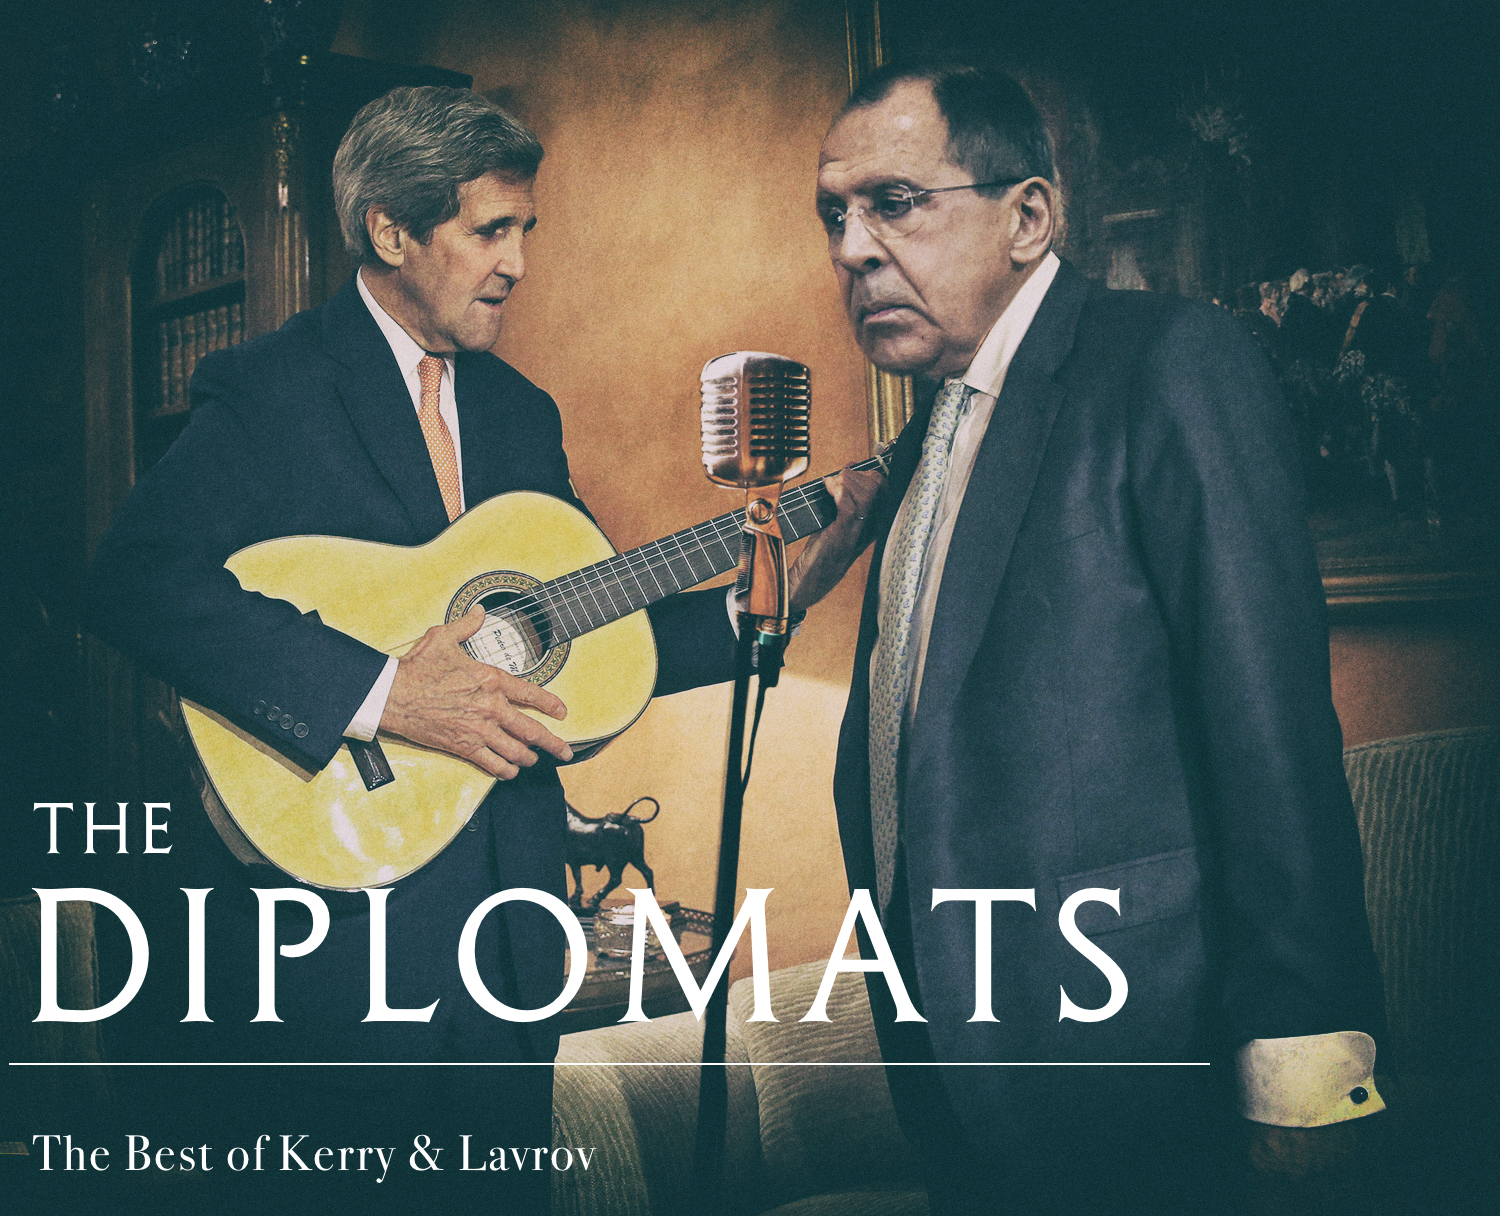 Kerry and Lavrov to form new band called The Diplomats - Kerry on guitar, Lavrov on vocals